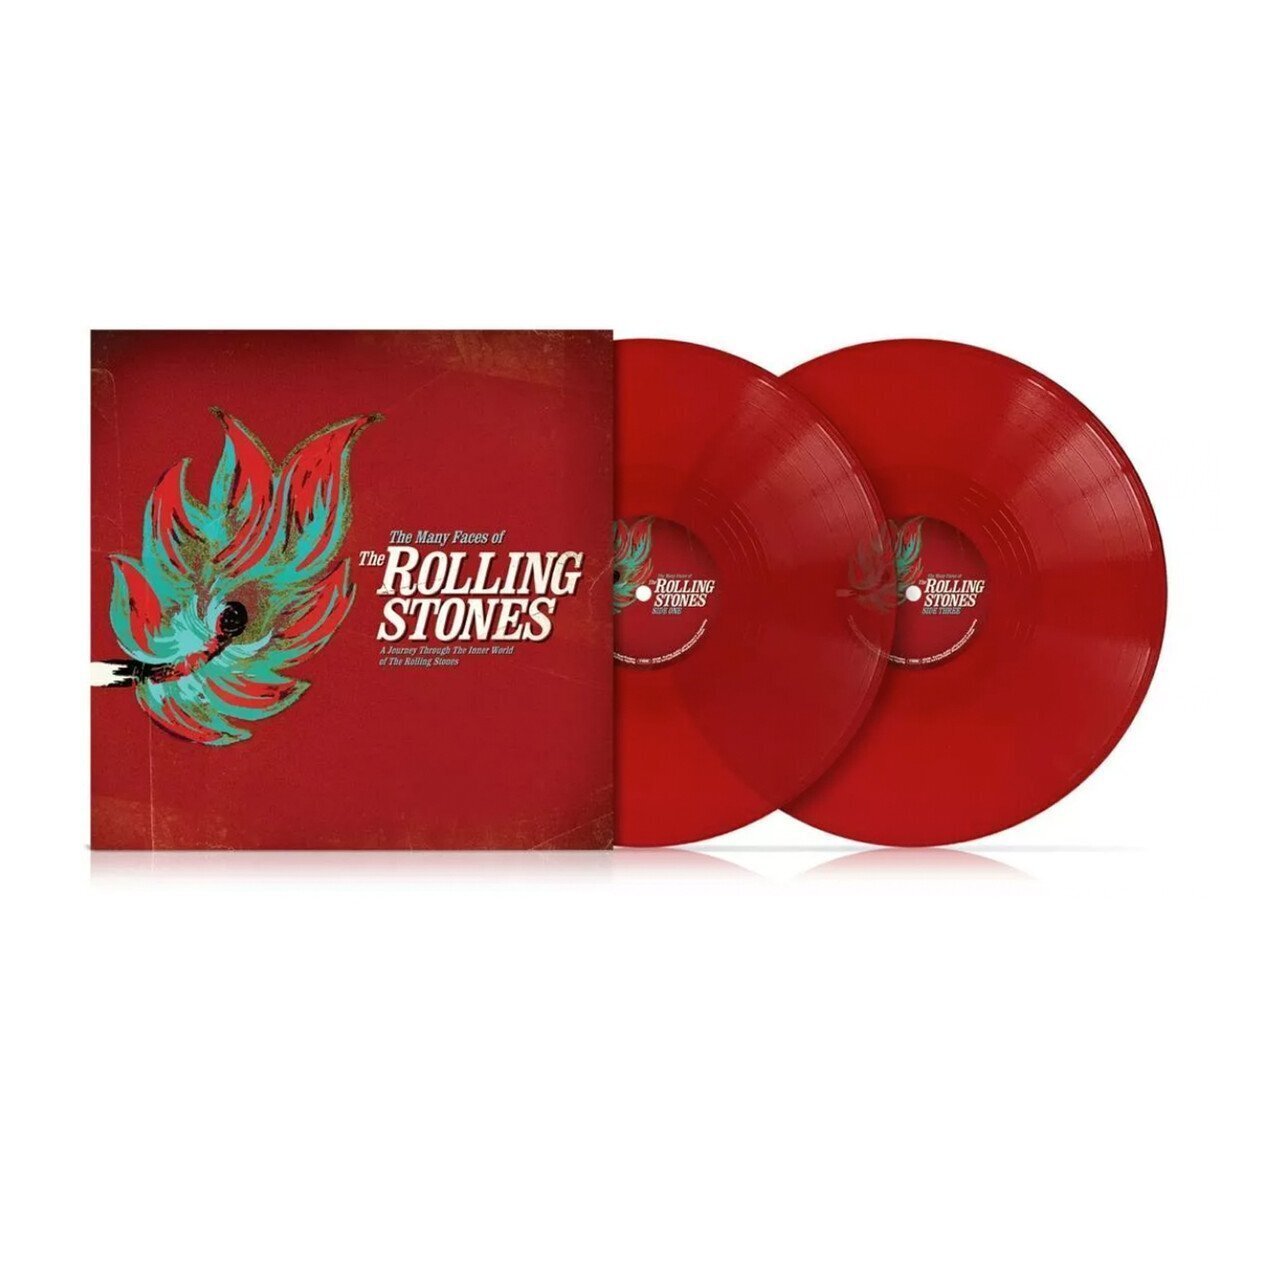 Many Faces of The Rolling Stones (Red Vinyl)